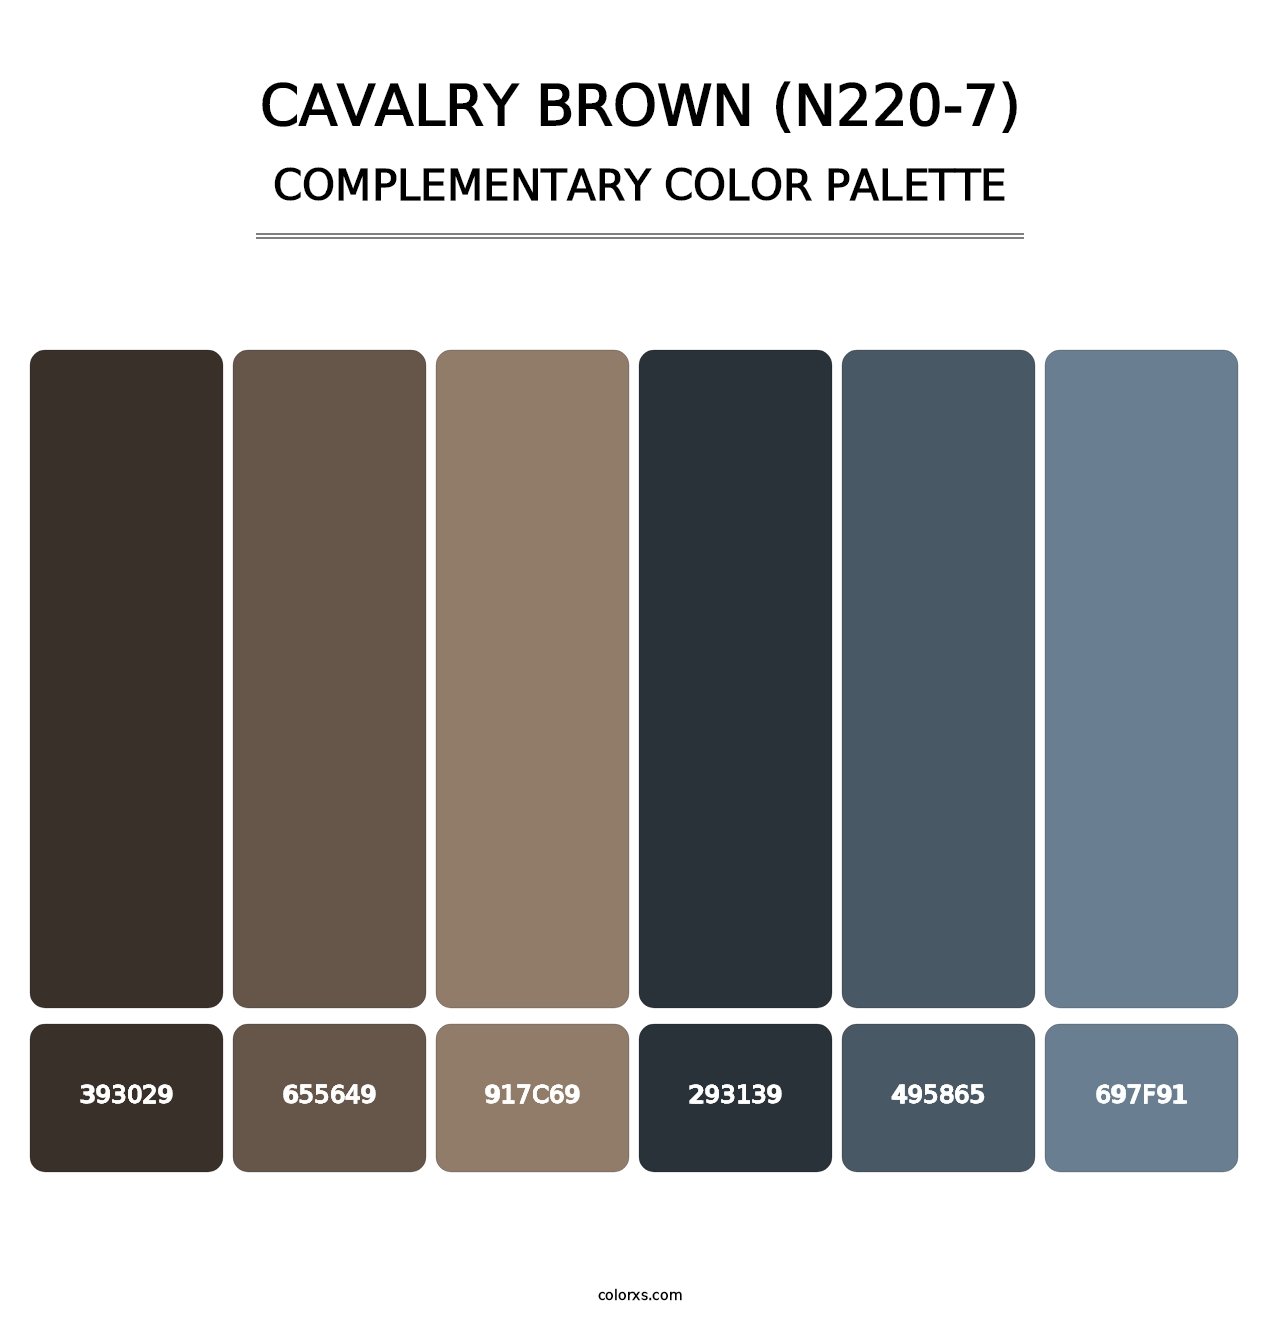 Cavalry Brown (N220-7) - Complementary Color Palette